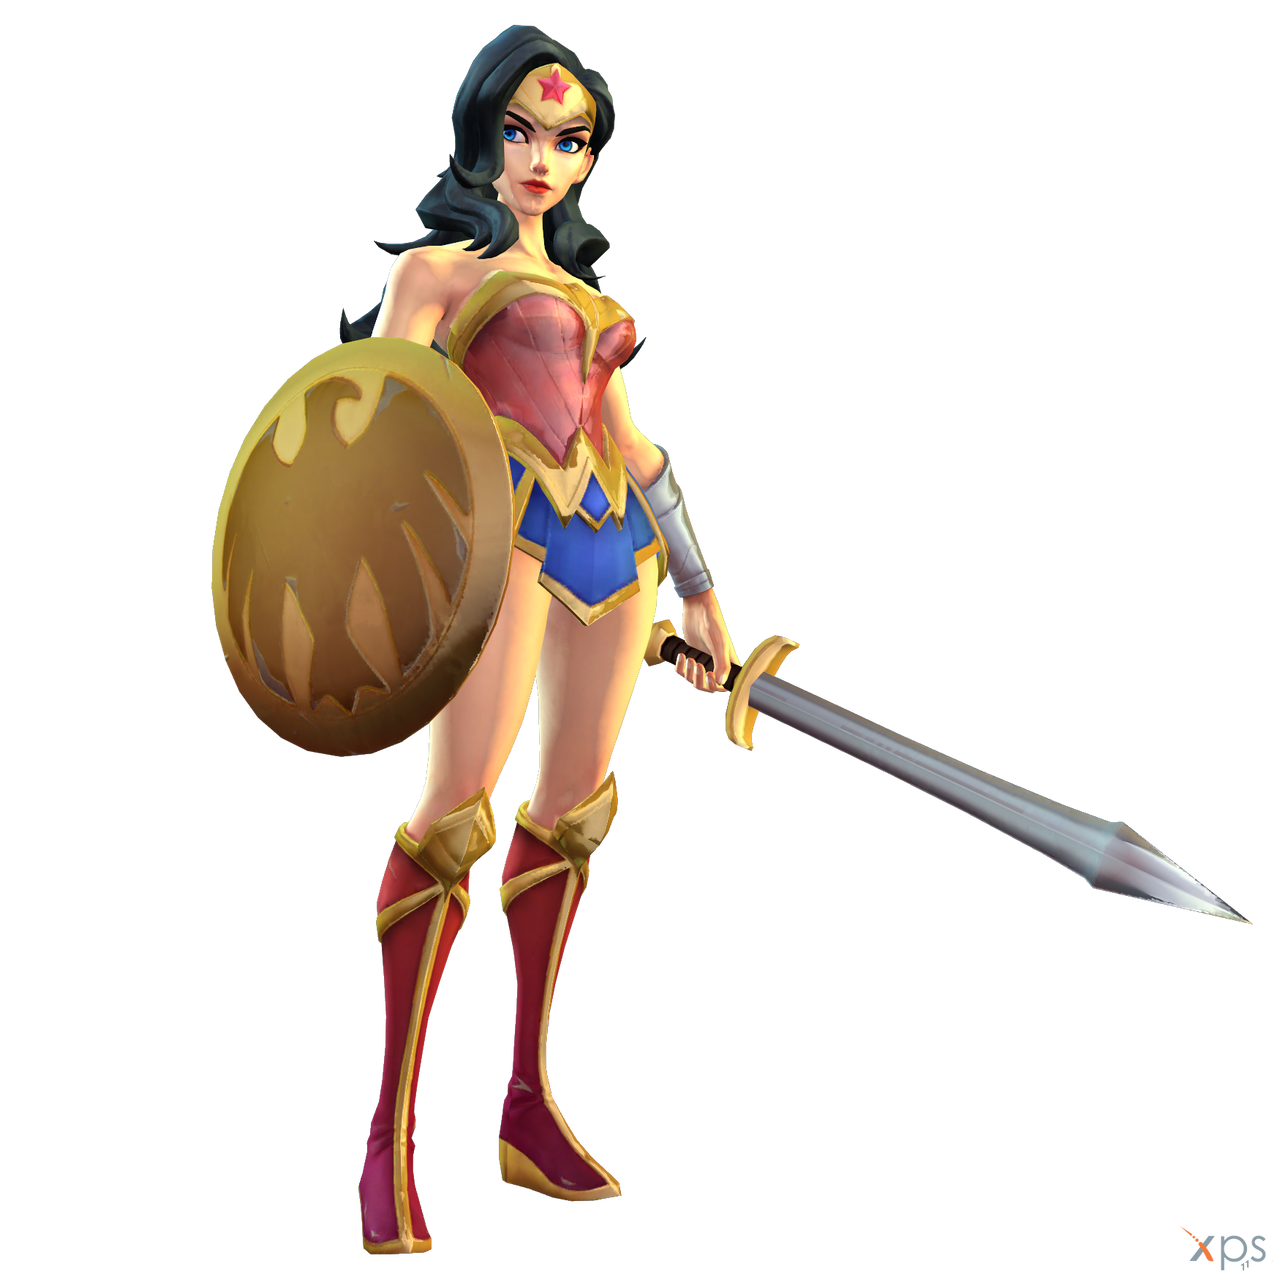 Wonder Woman Video Game Cover by MrConcepts on DeviantArt